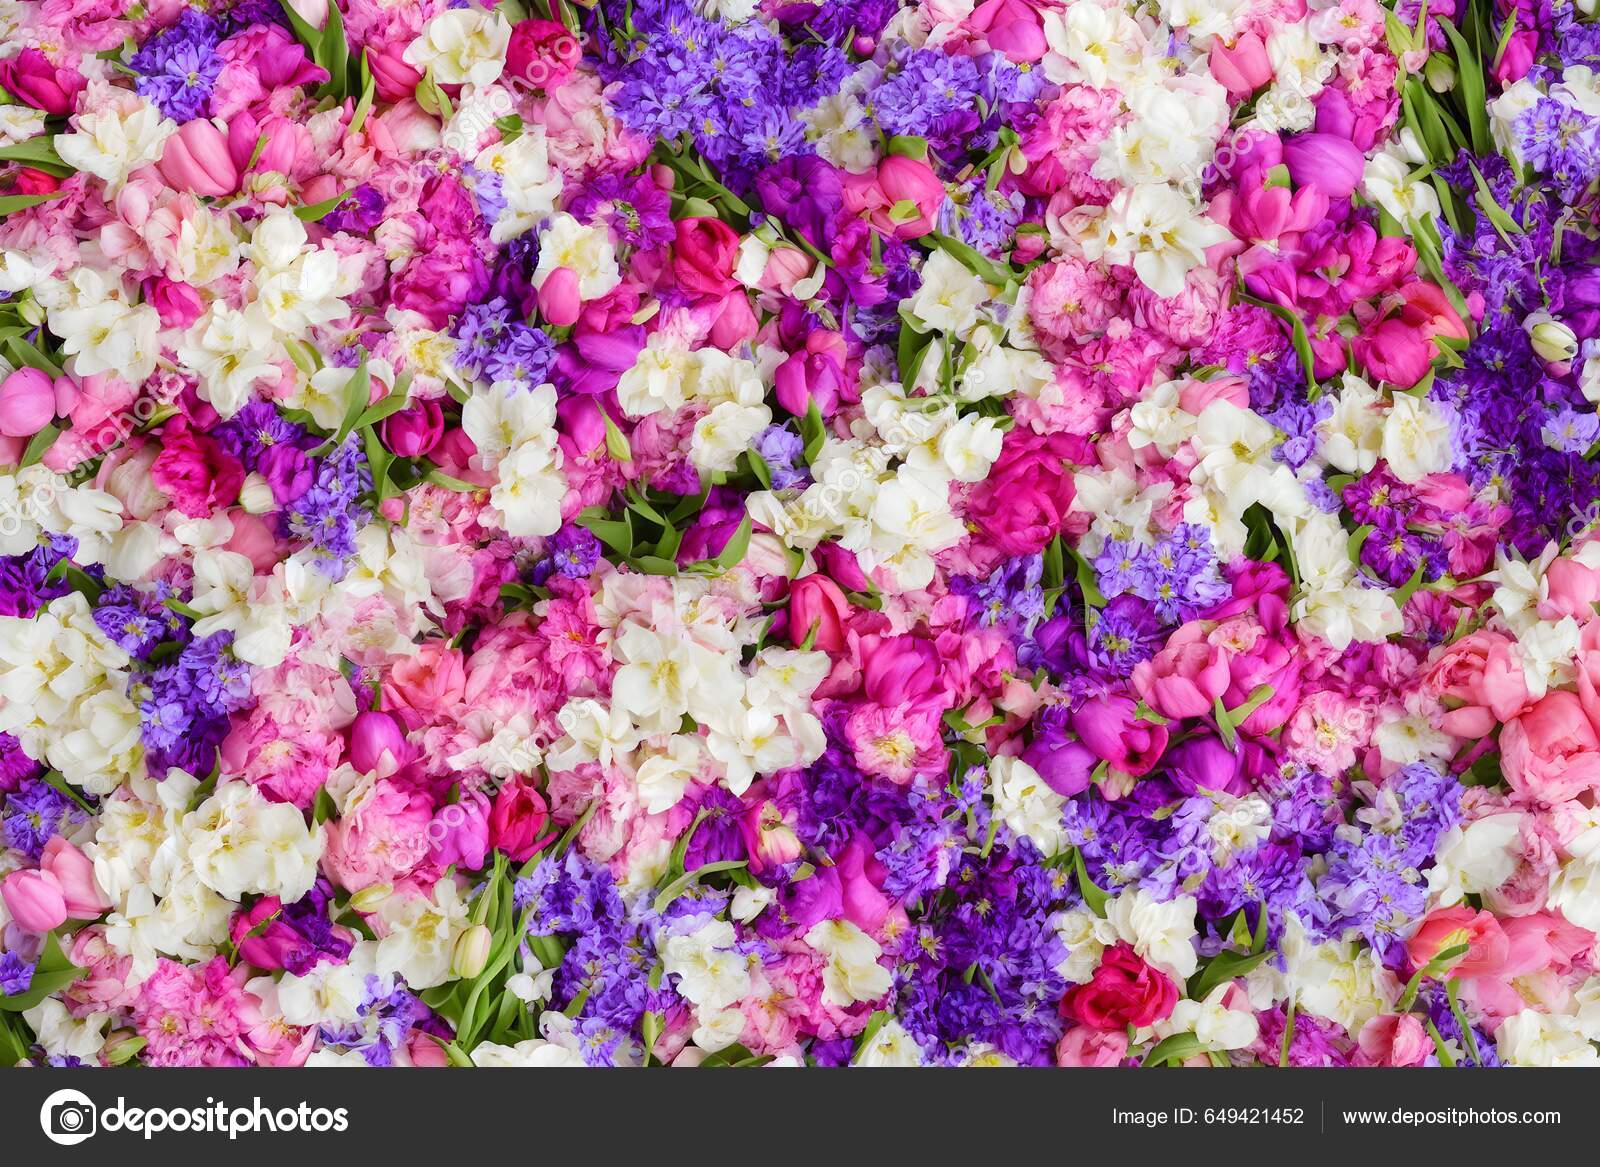 Floral background Stock Photos, Royalty Free Floral background ...